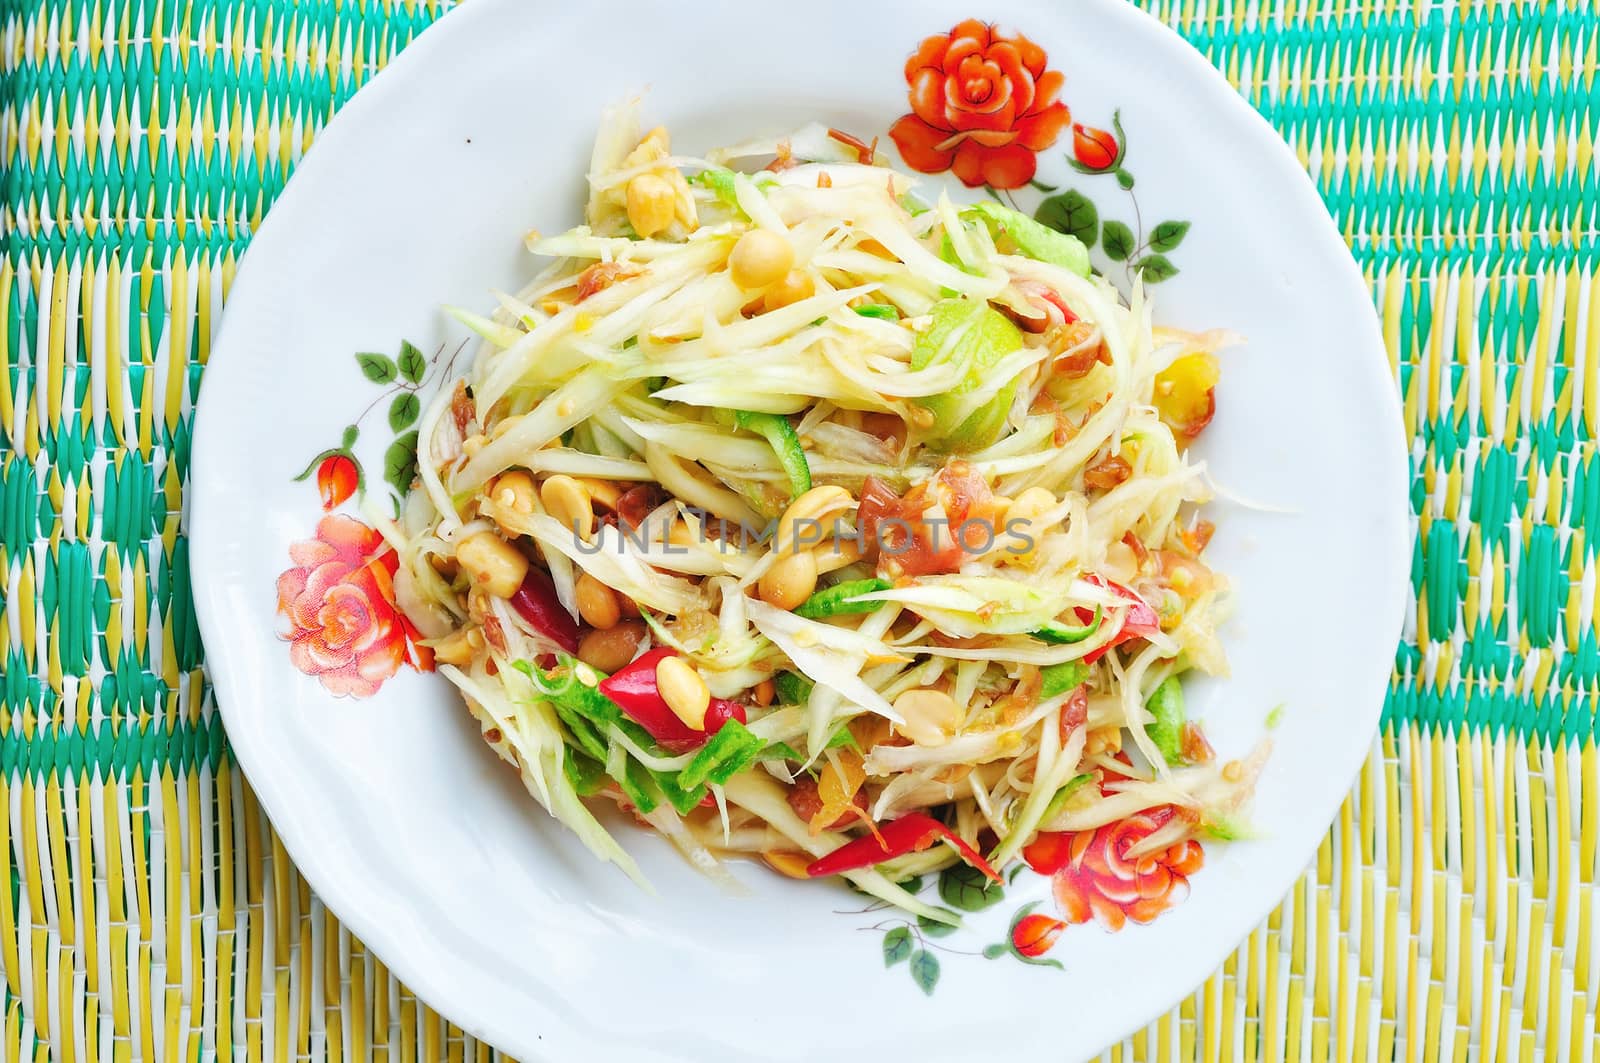 Green papaya salad Thai cuisine spicy delicious by thampapon